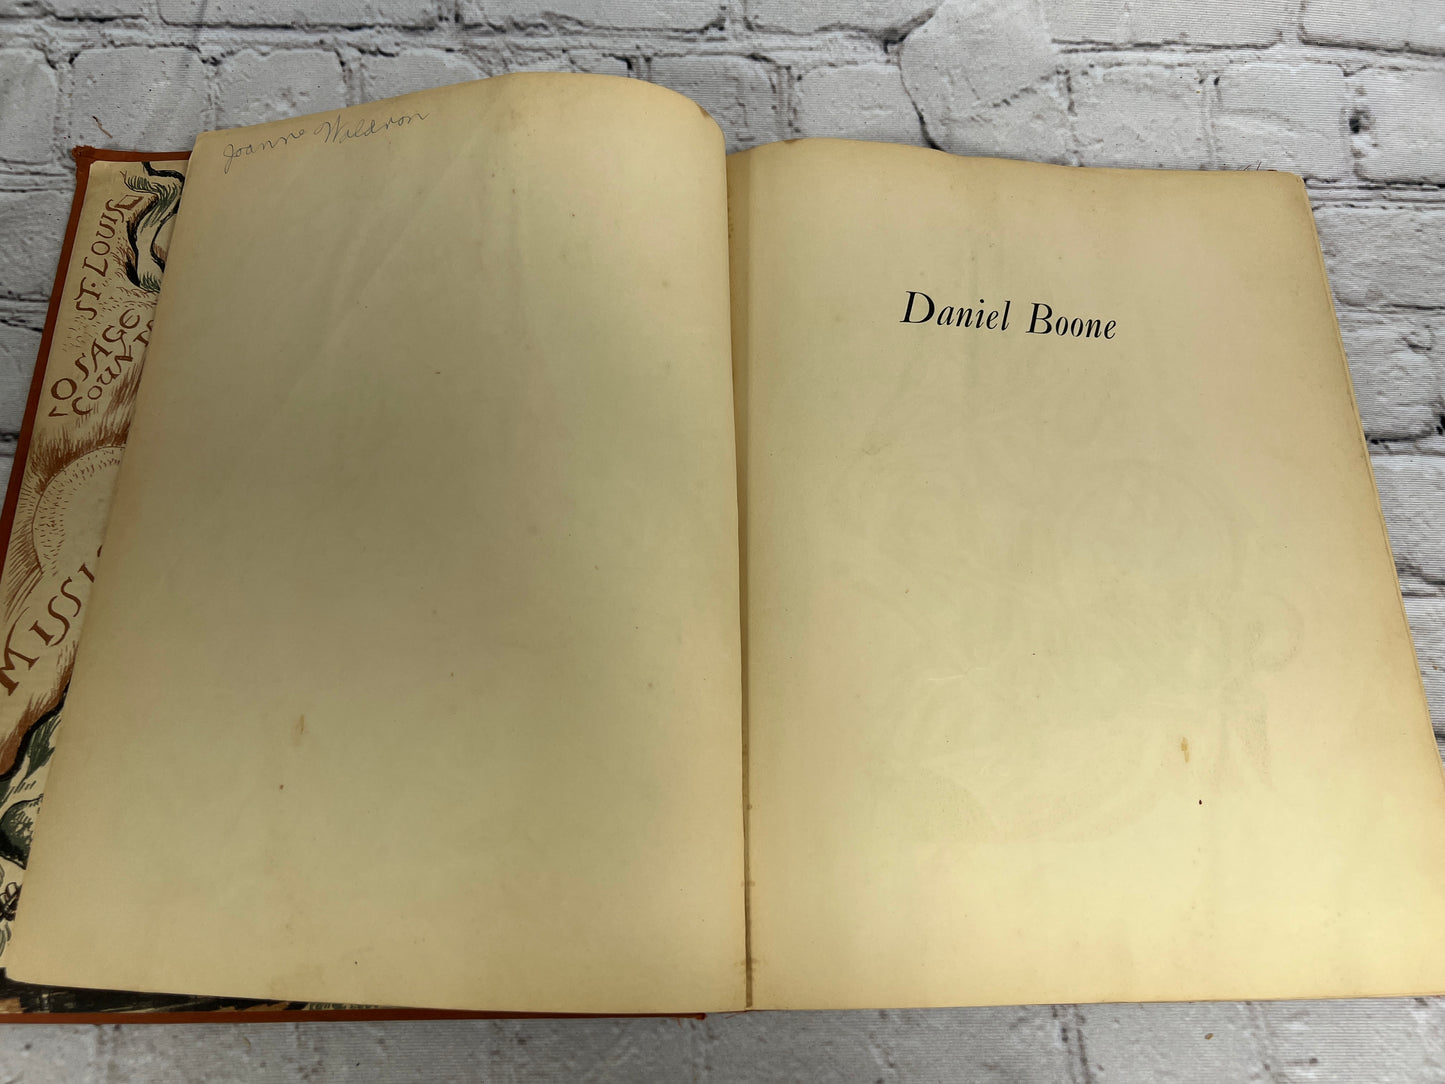 Daniel Boone by  James Daugherty [1st Edition · 1939]